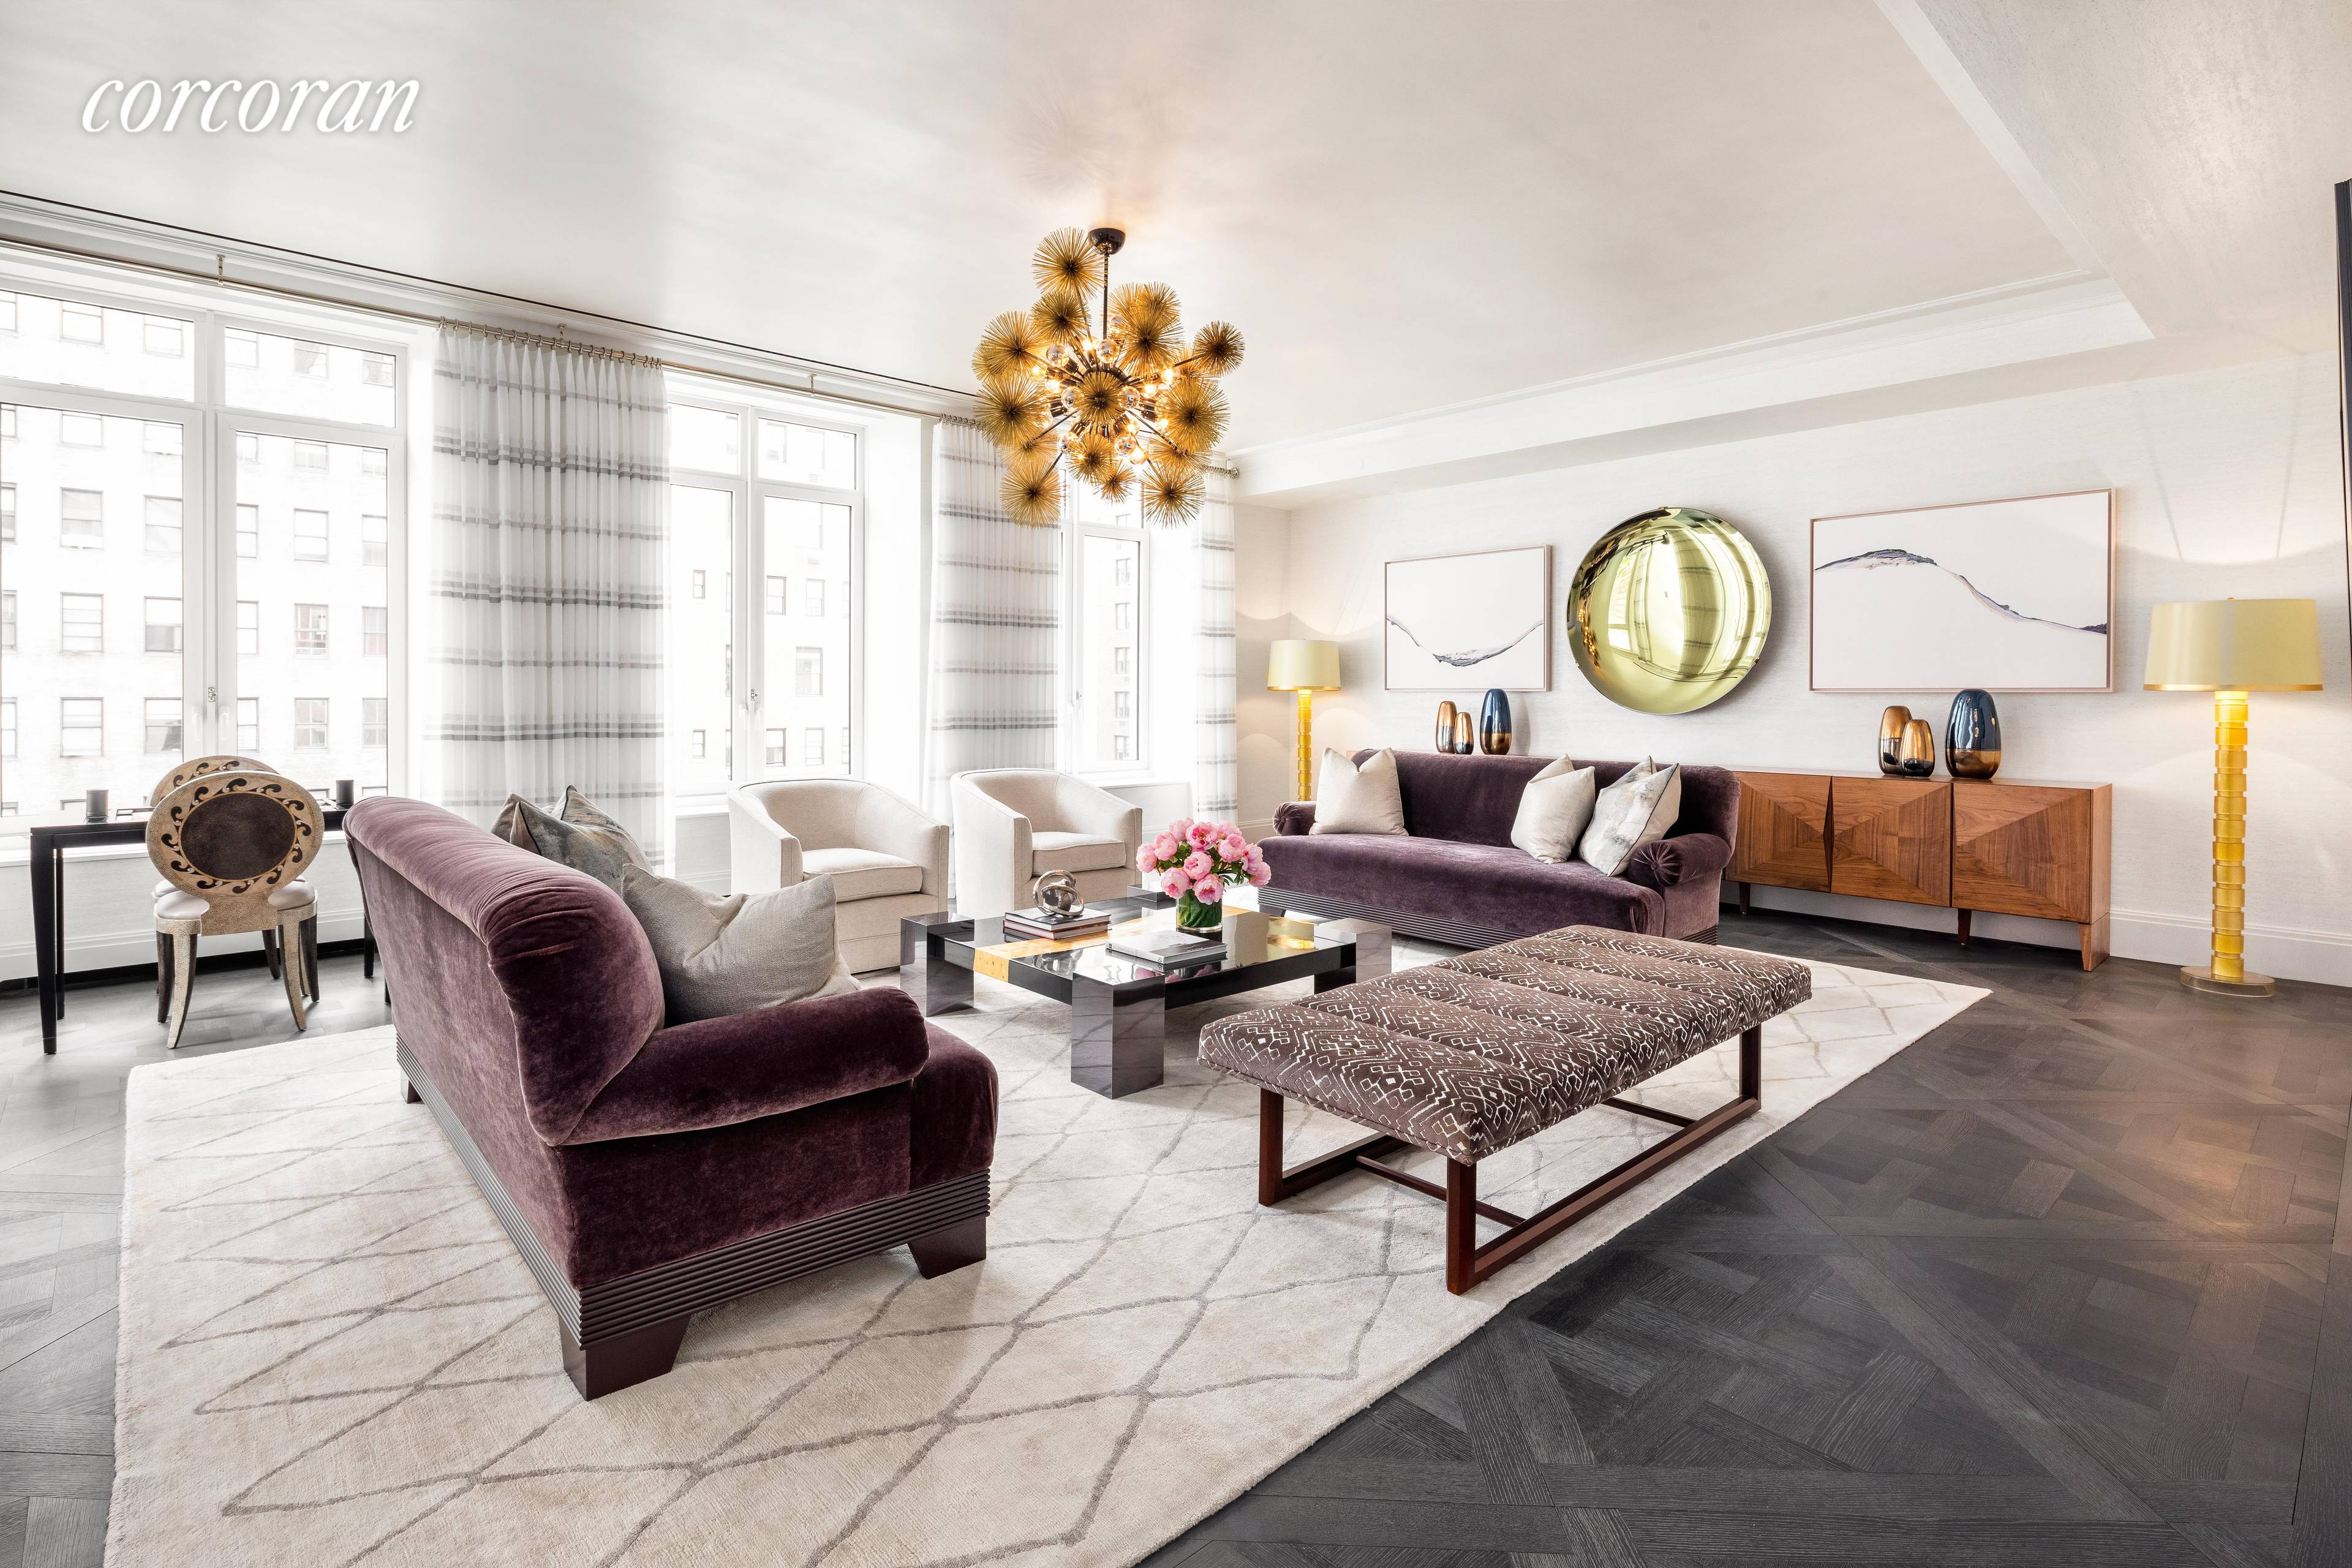 Introducing the 7th floor at 1010 Park Avenue, one of New York's most distinguished new addresses and finest boutique condominiums developed by The Extell Development Company.